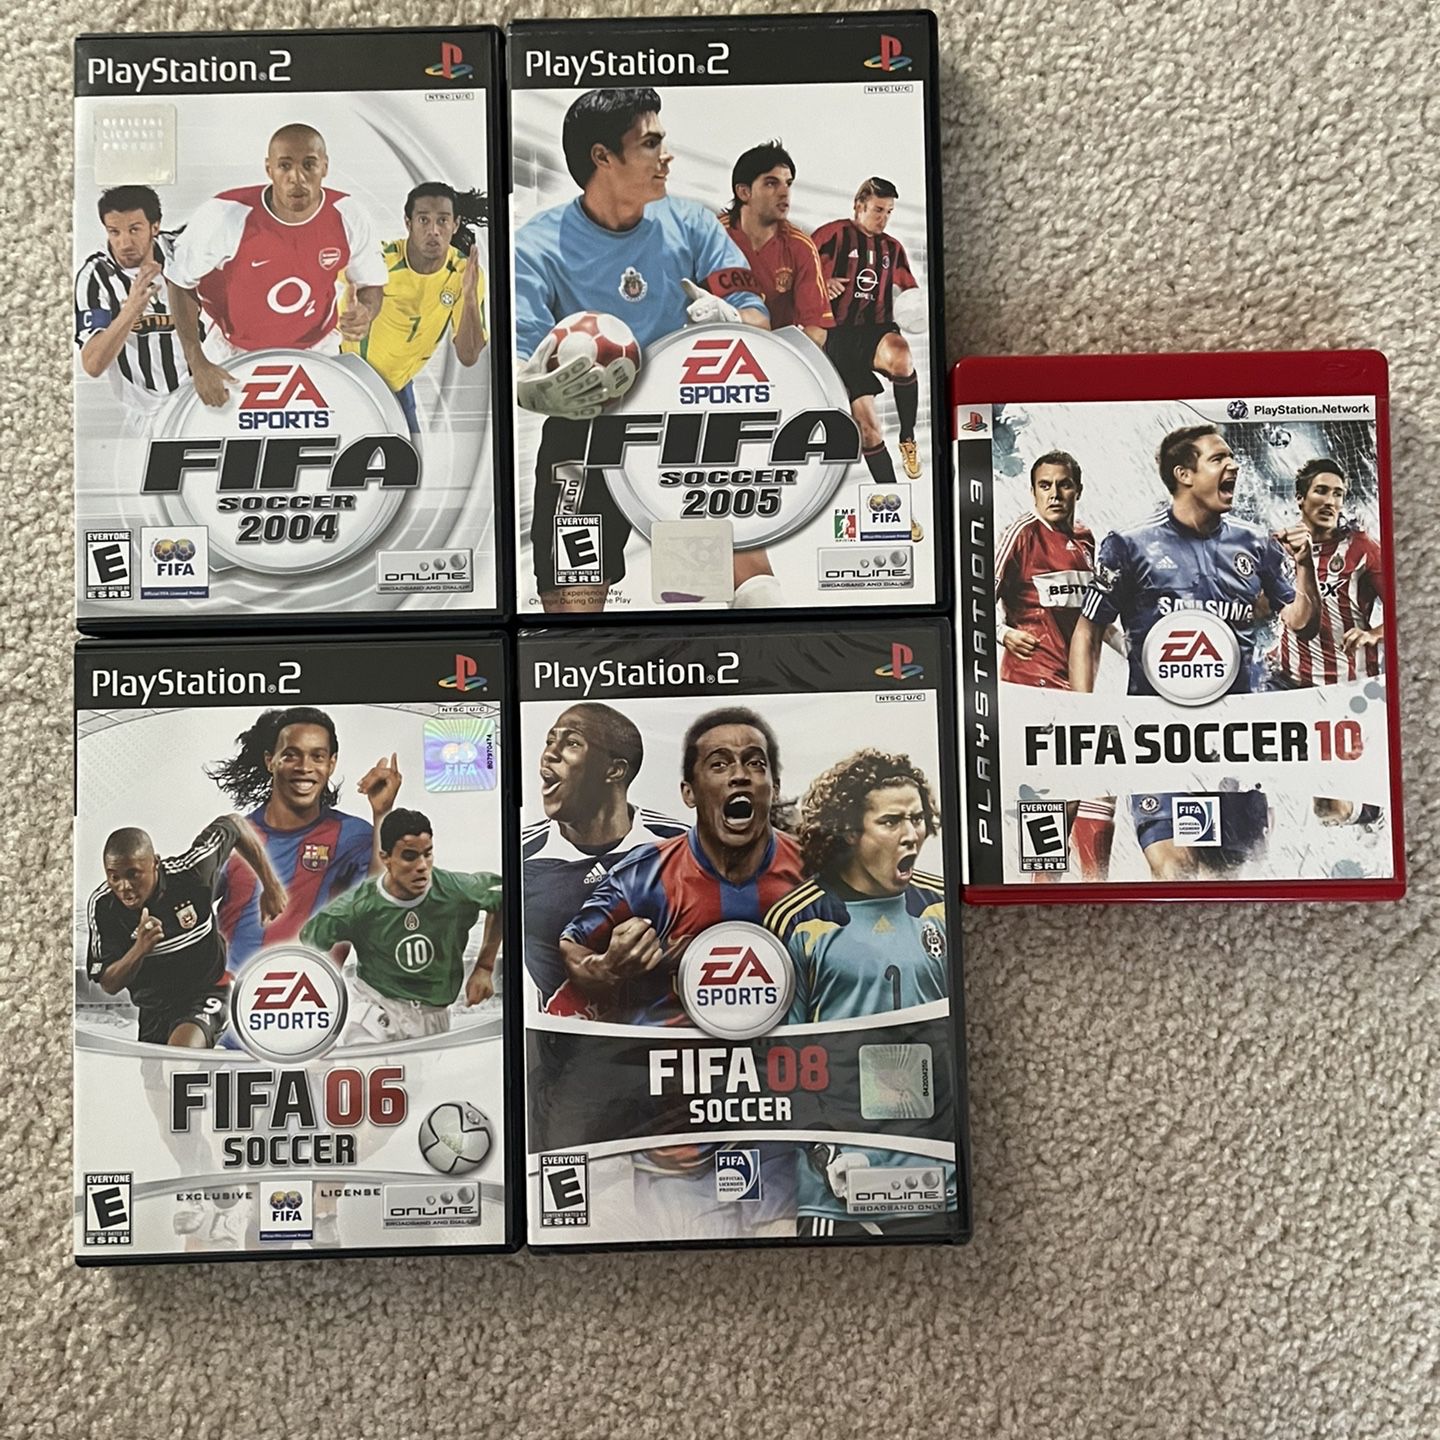 PS2 FIFA Soccer Collection and PS3 FIFA 2010